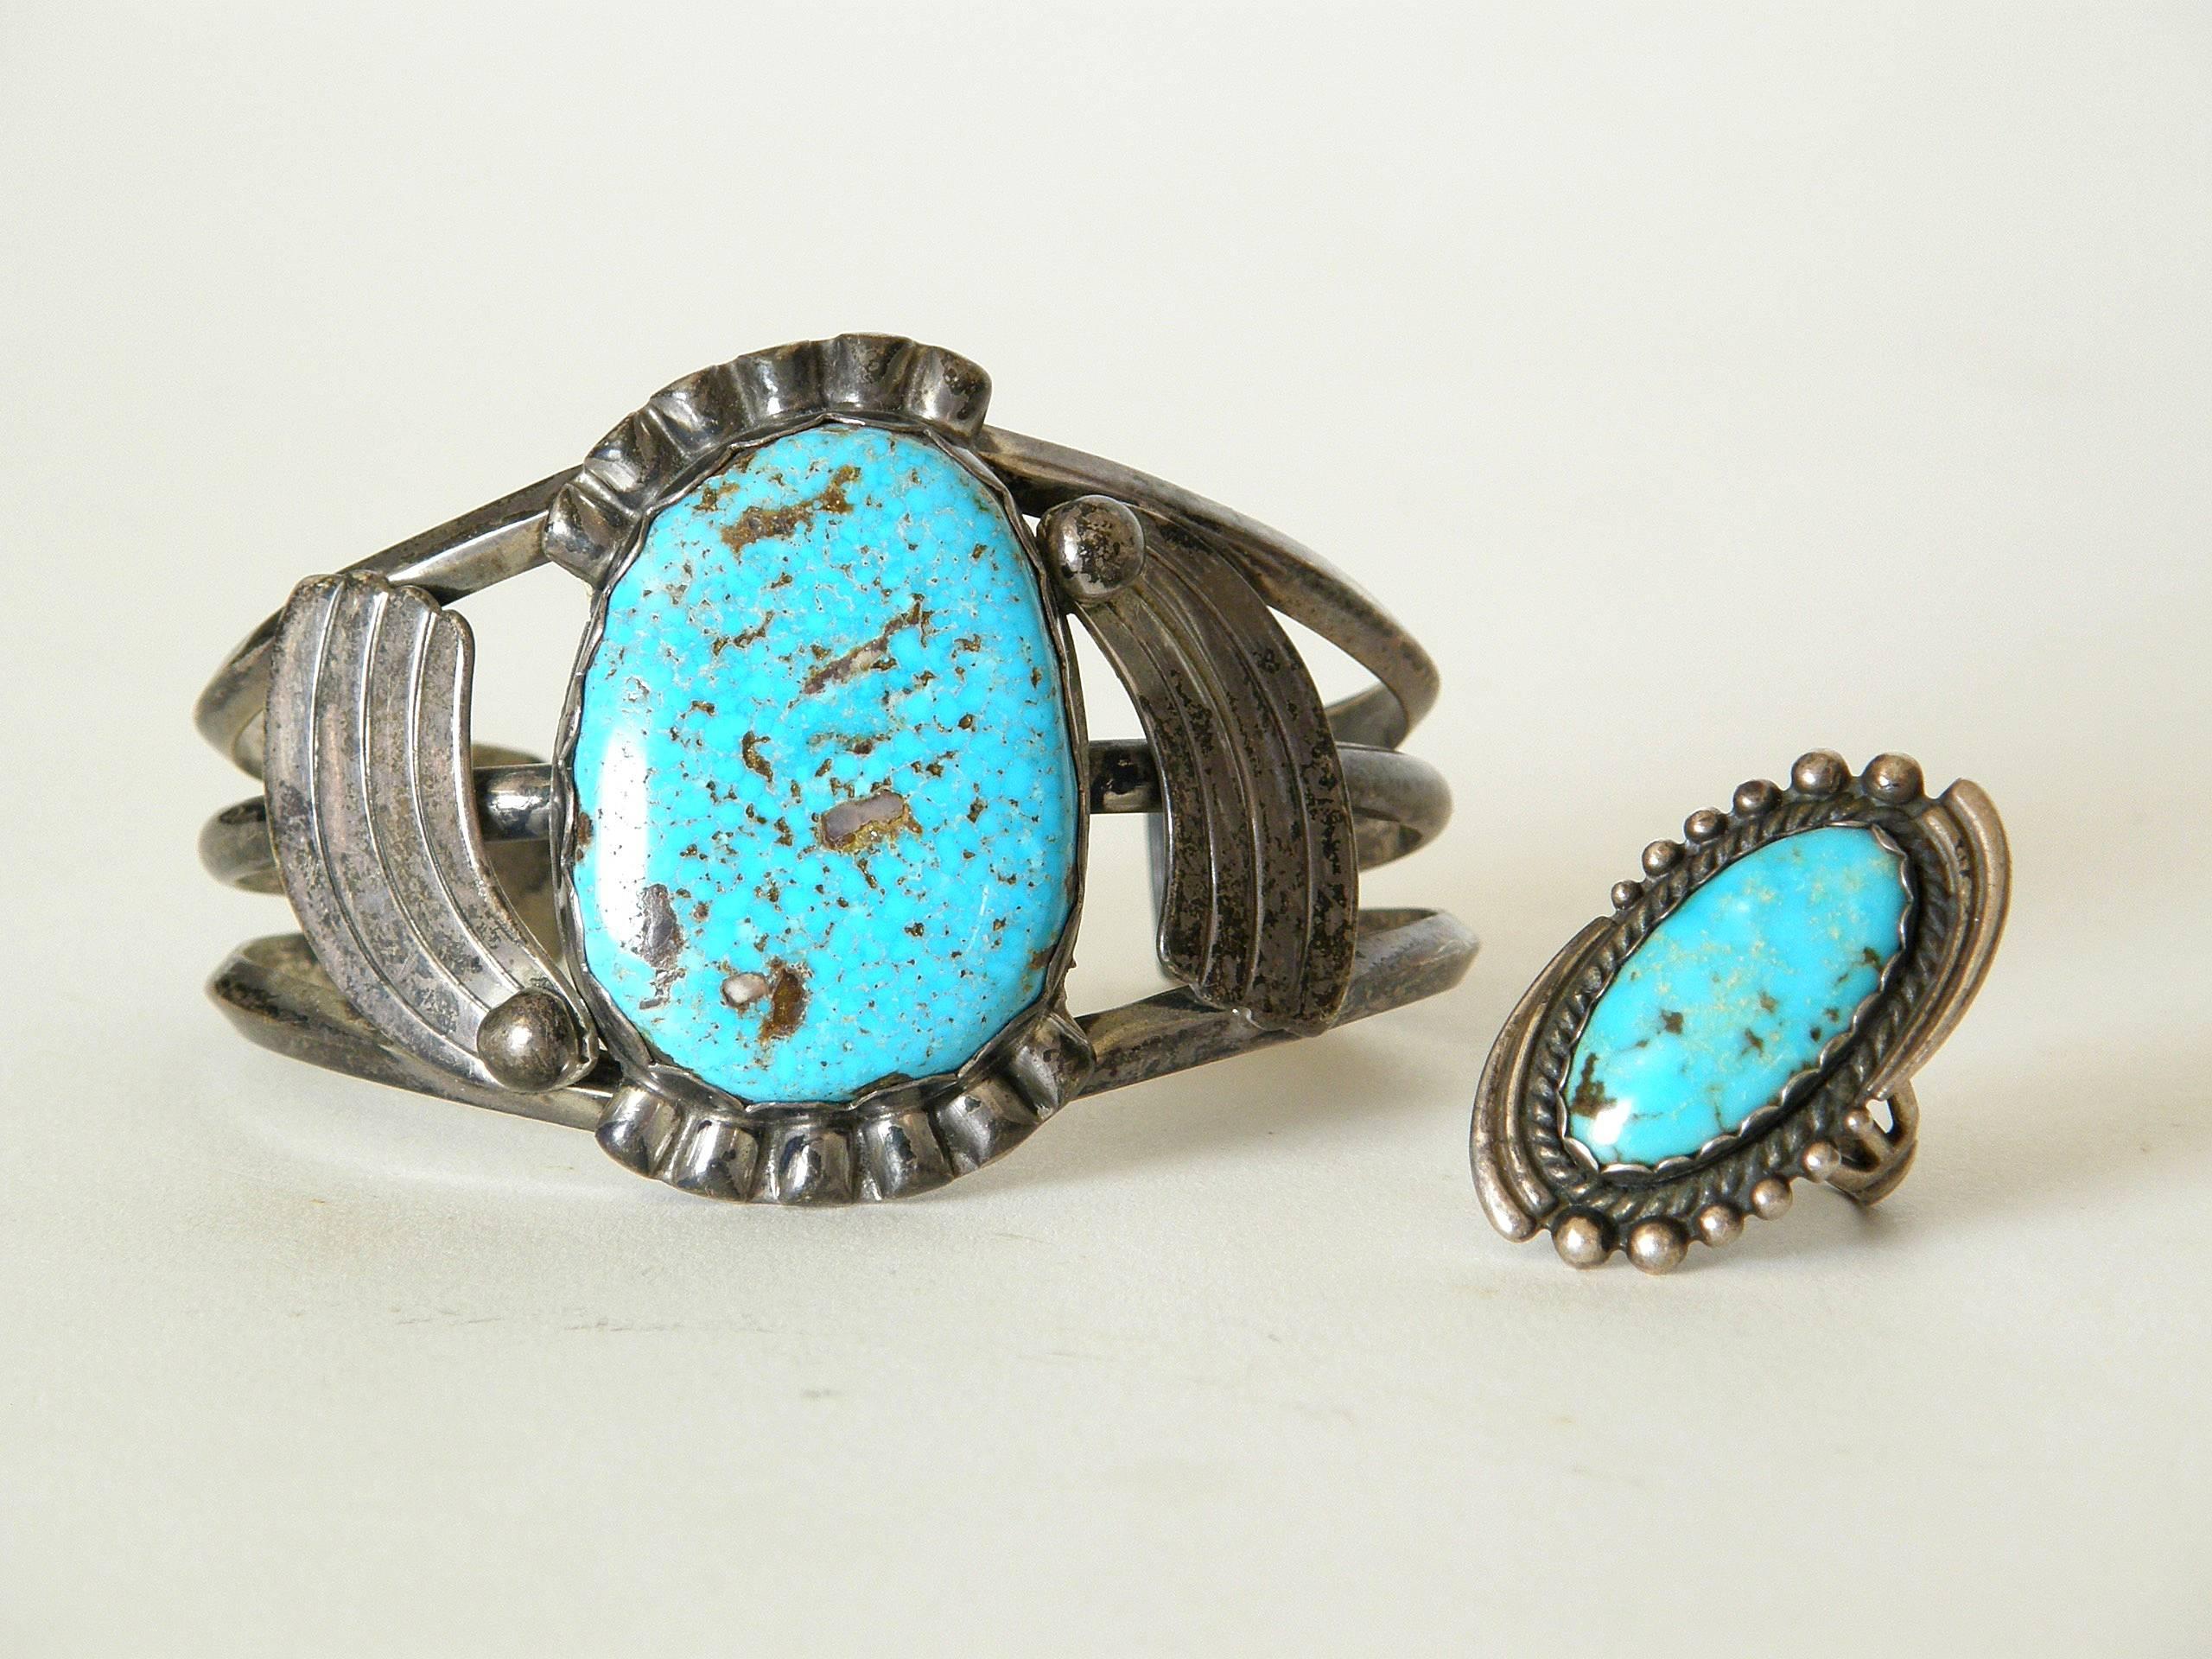 These c. 1940s or 1950s sterling cuff bracelet and ring are set with turquoise. The stones have scalloped bezel settings that are flanked by tapering bands that create a feeling of movement like shooting stars or a spinning effect. The ring and